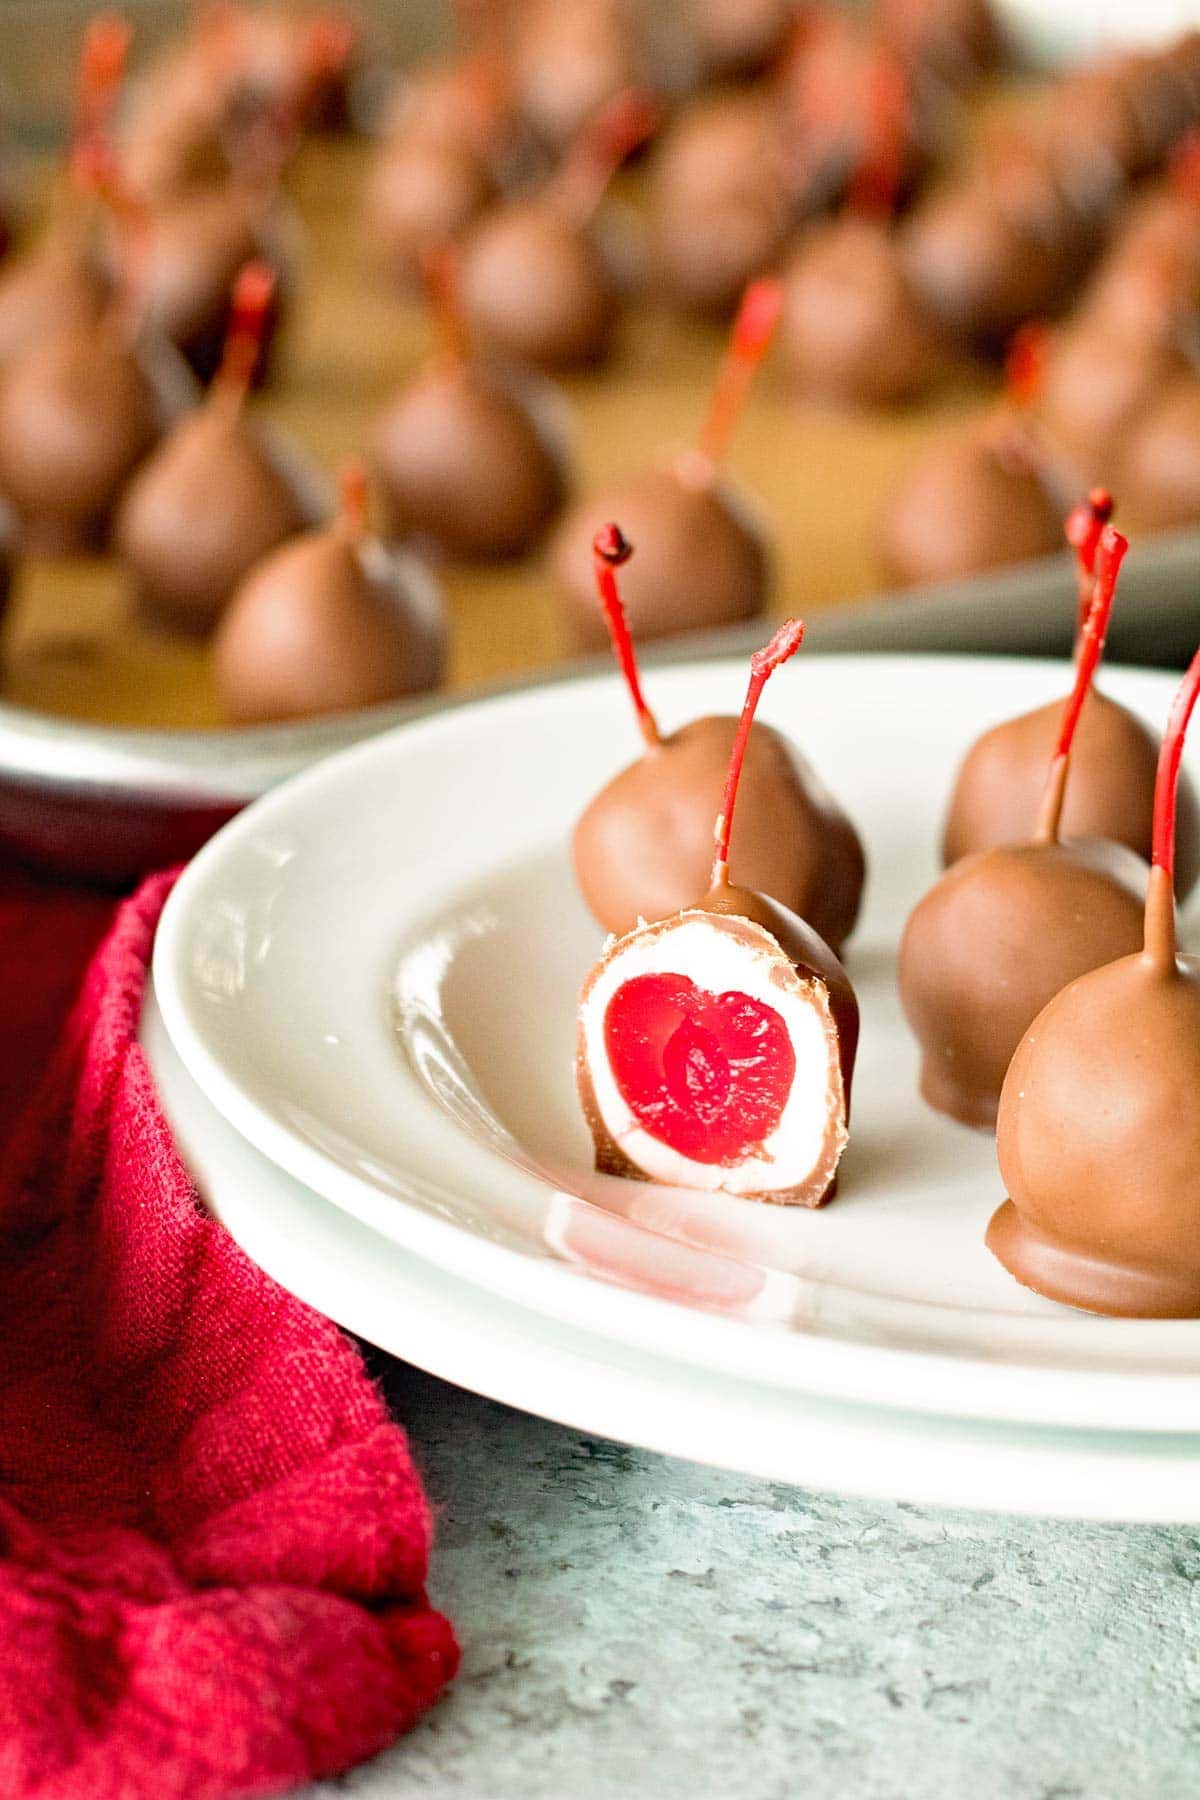 Delicious Chocolate Covered Cherries You can make at home